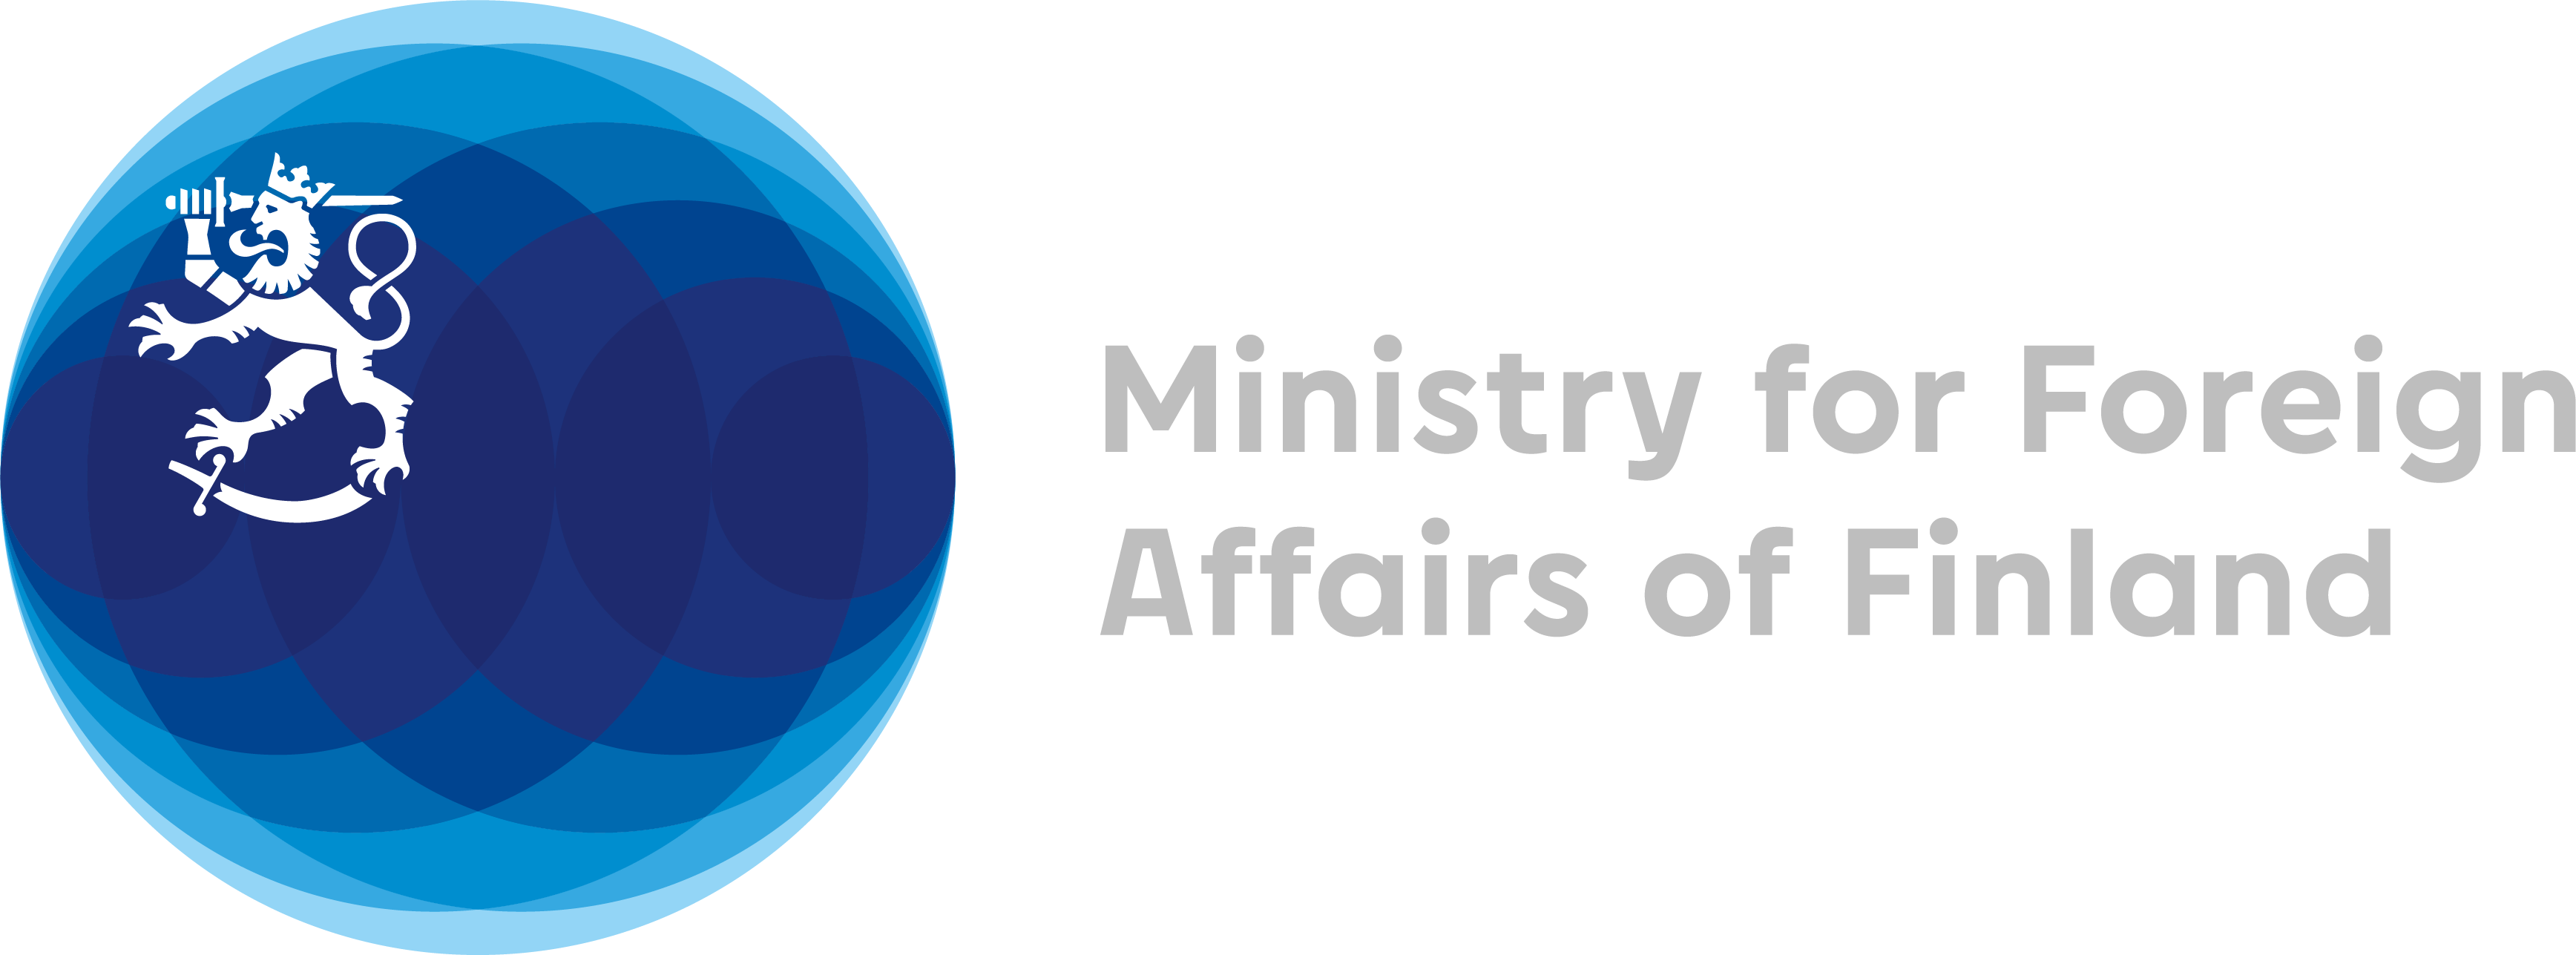 Ministry for foreign affairs of Finland logo.